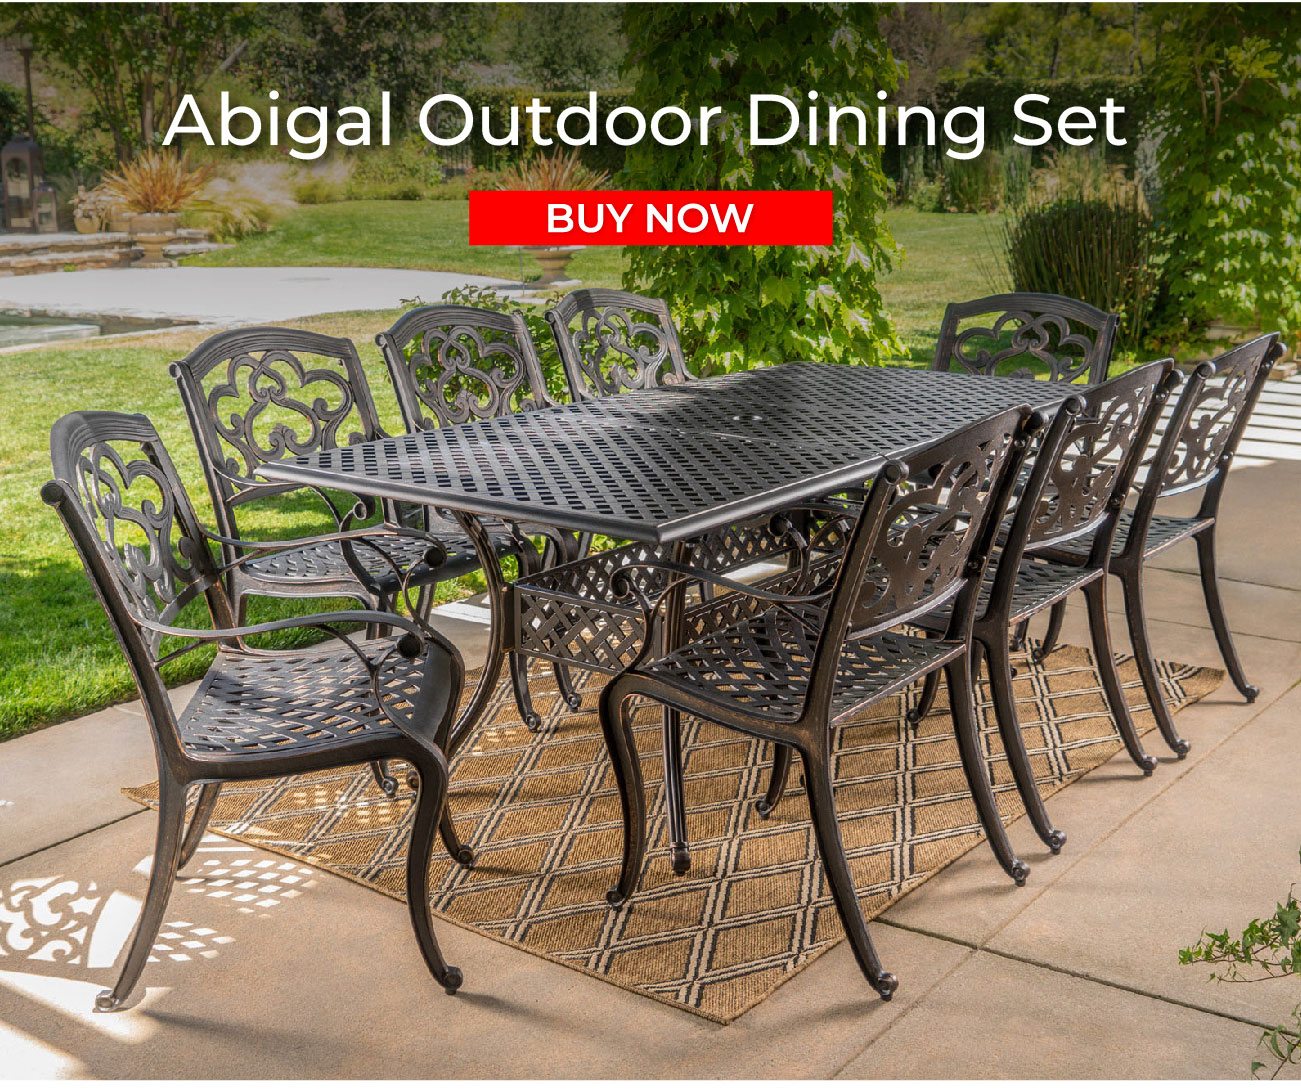 Abigal Outdoor Dining Set